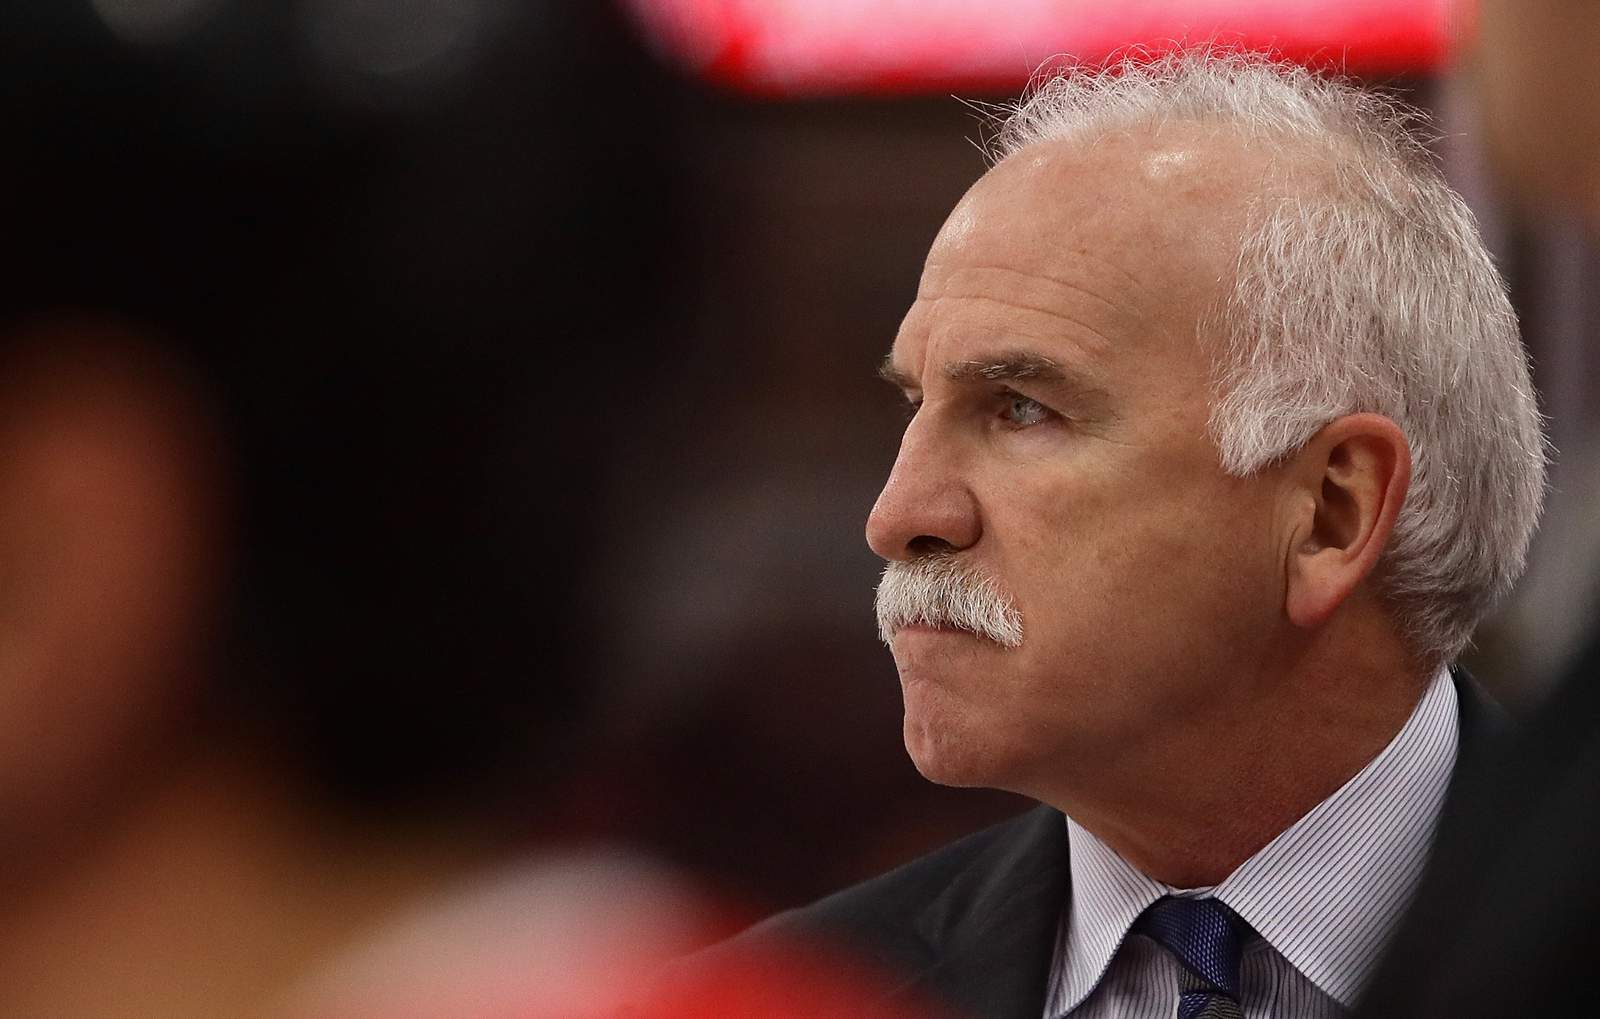 Panthers coach Joel Quenneville breaks down training camp, discusses new players and open roster spots